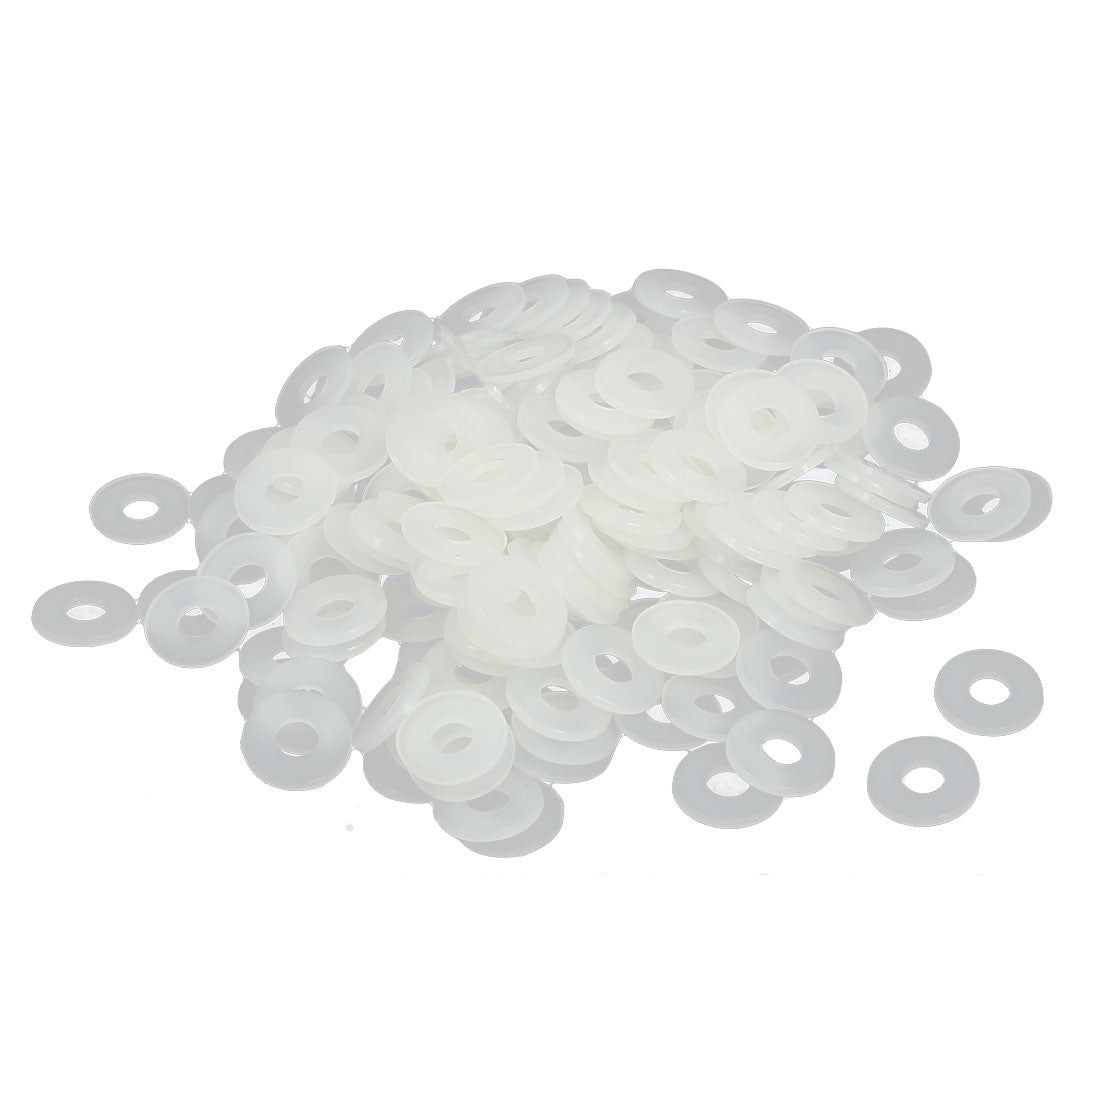 Uxcell Uxcell M6 x 12mm x 1.2mm Nylon Flat Insulating Washers Gaskets Spacers Fastener 200PCS